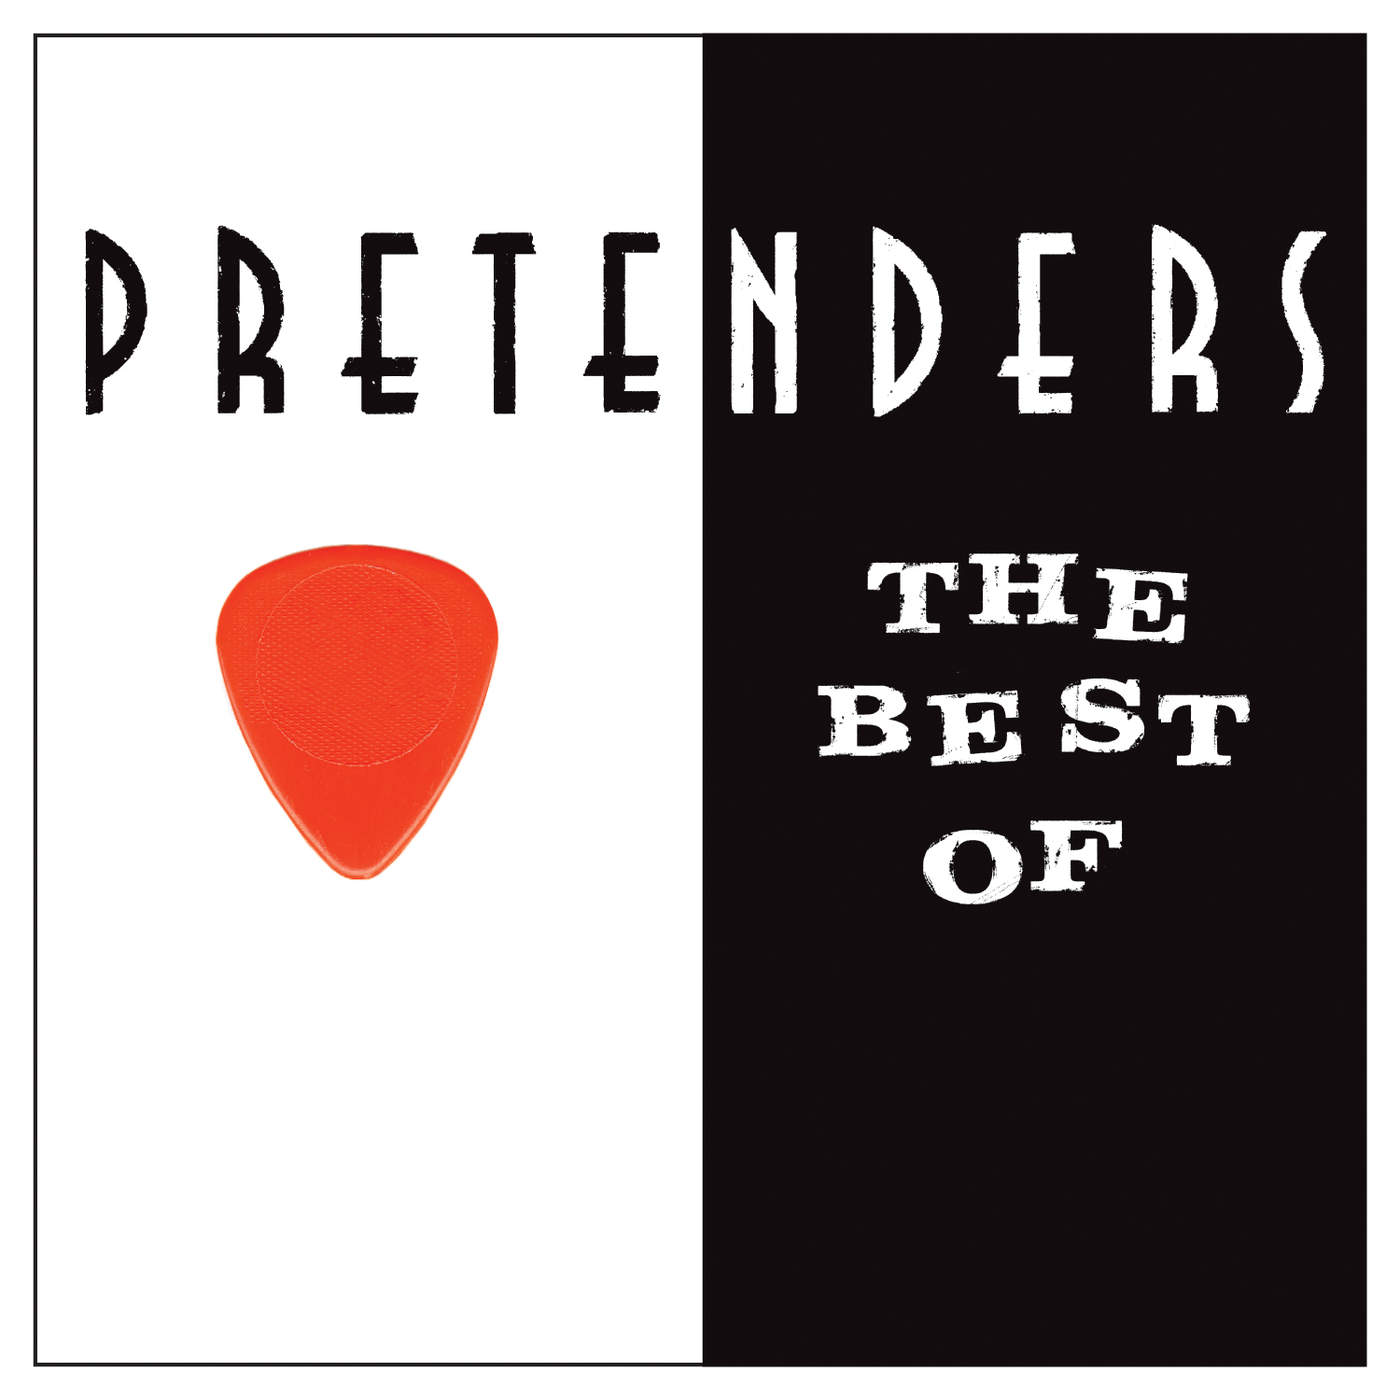 Art for My City Was Gone by Pretenders